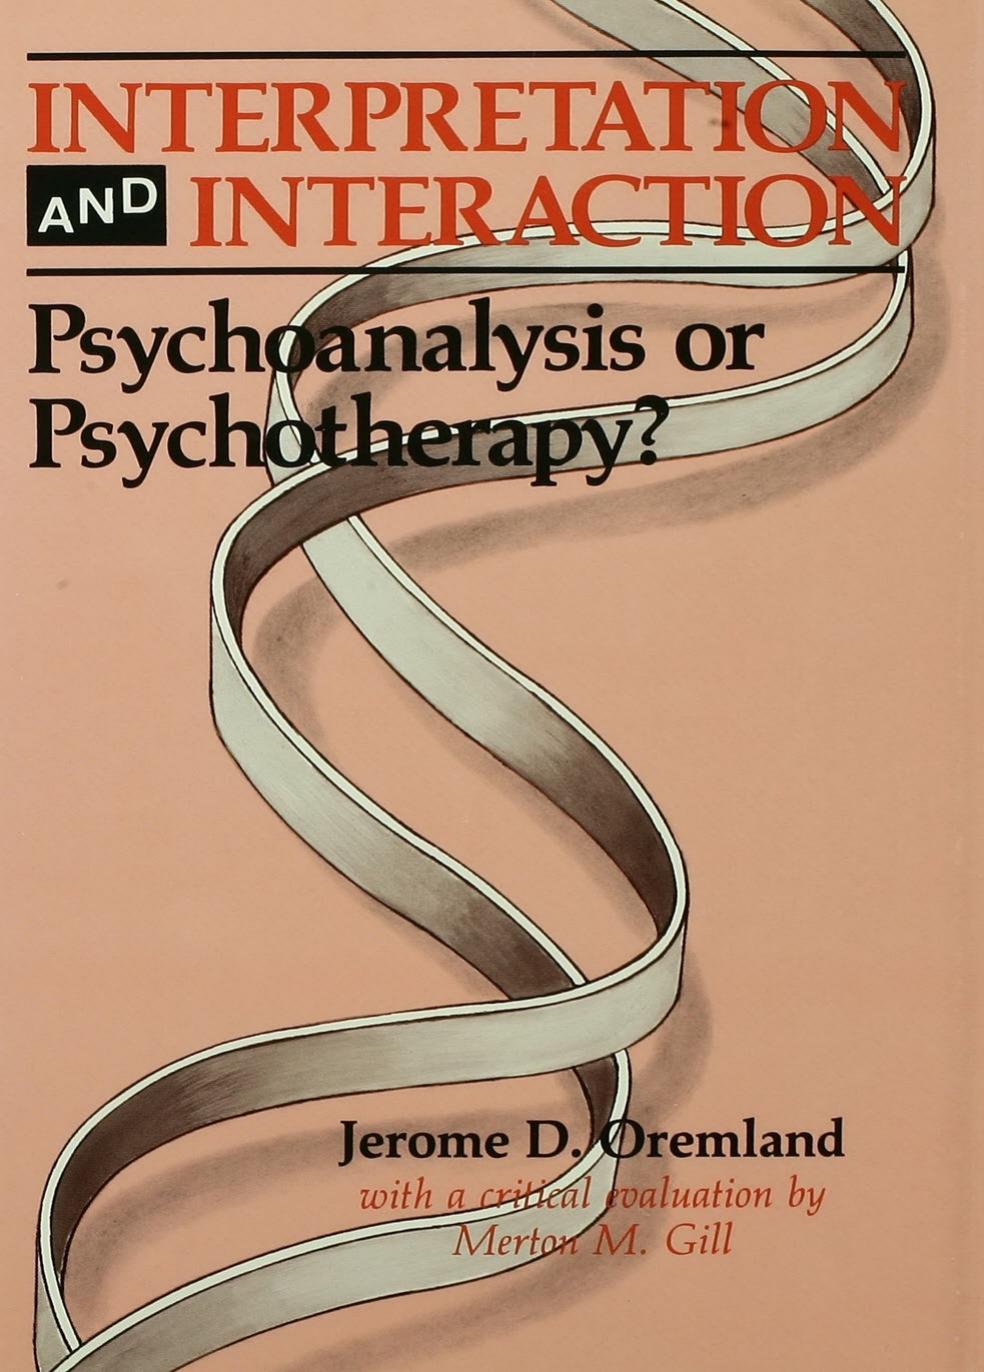 (eBook PDF)Interpretation and Interaction: Psychoanalysis or Psychotherapy by Jerome D. Oremland,Merton M. Gill